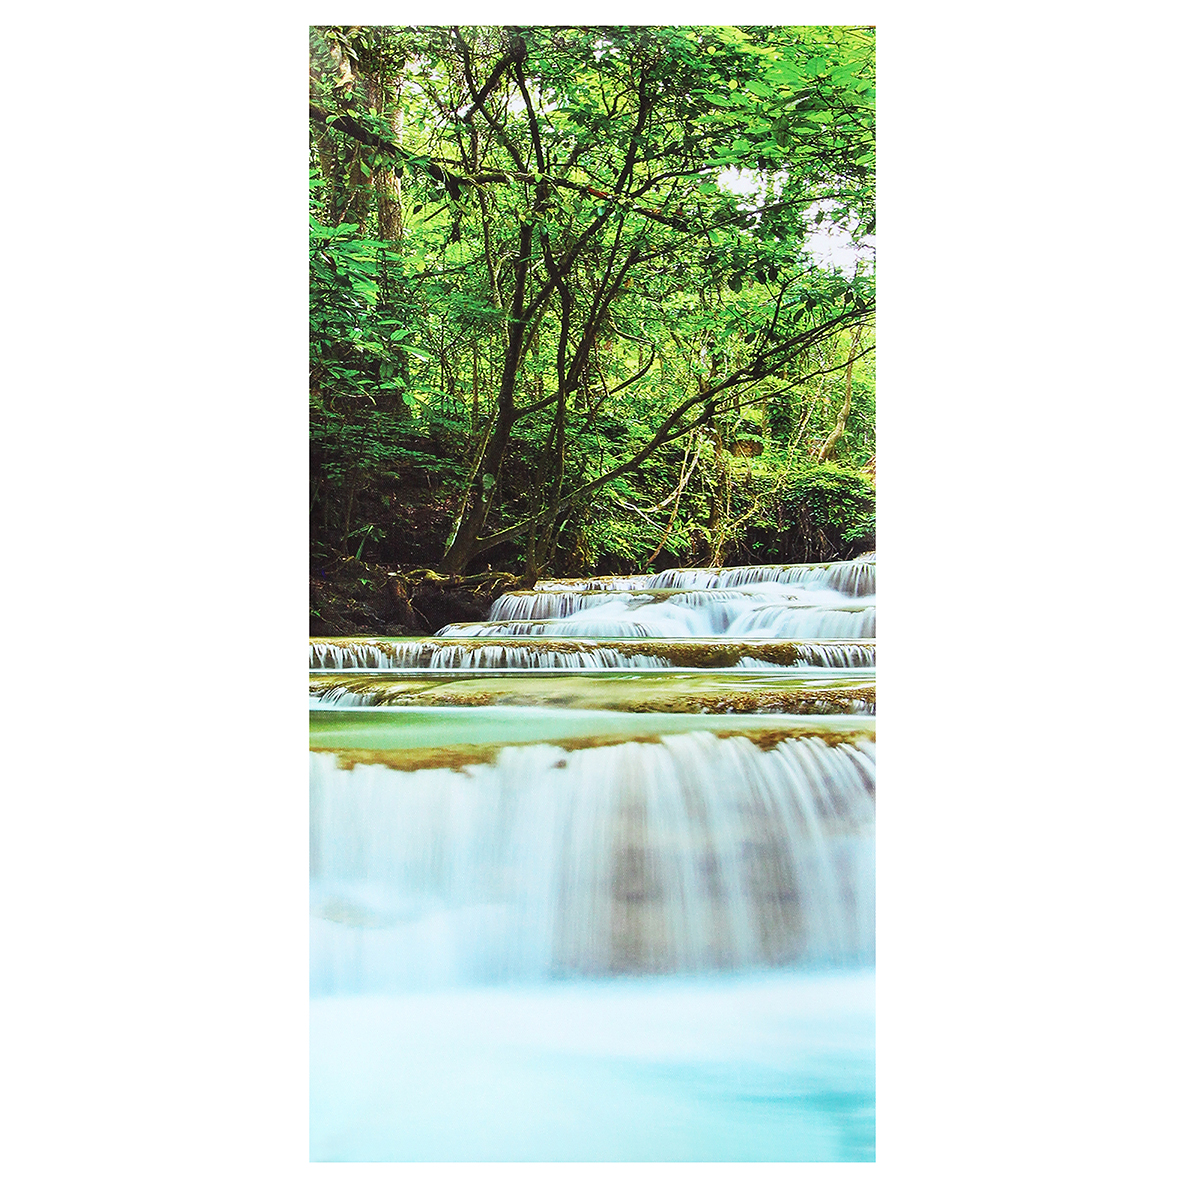 30x60CM-5PCS-Canvas-Painting-Forest-Waterfall-Wall-Art-Picture-Home-Decor-1097094